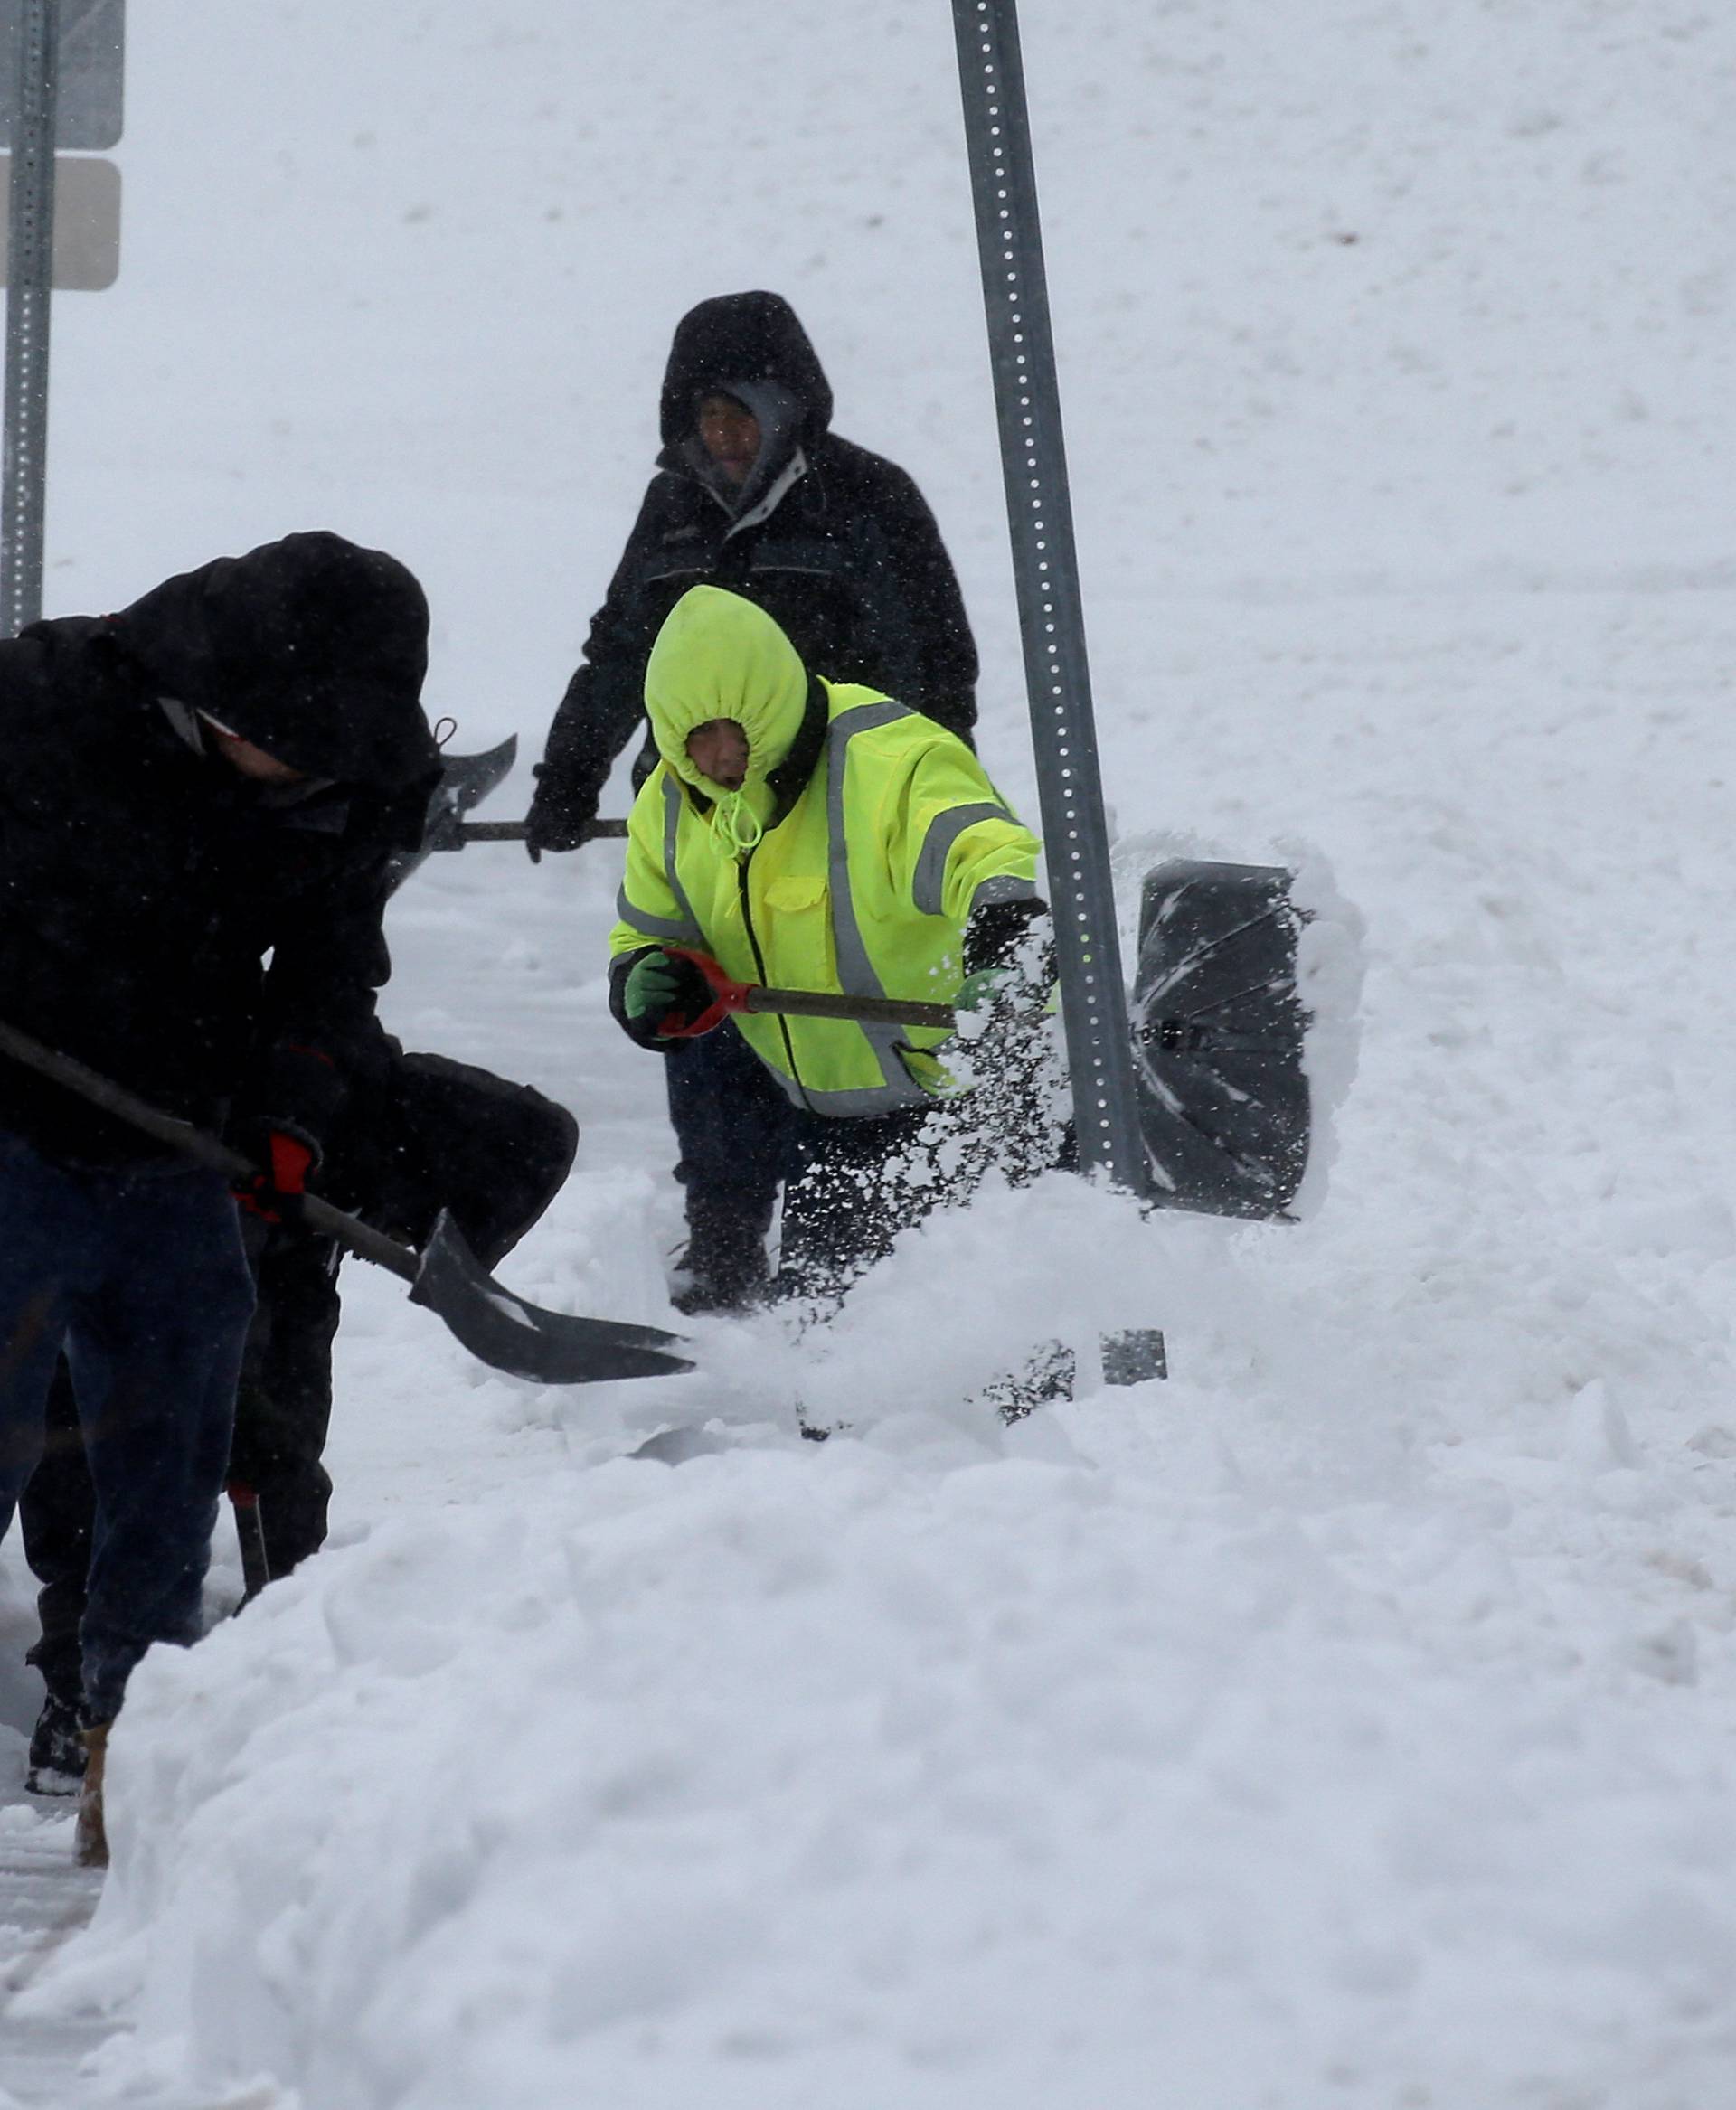 Men shovel snow during a snowstorm in the village of Nyack